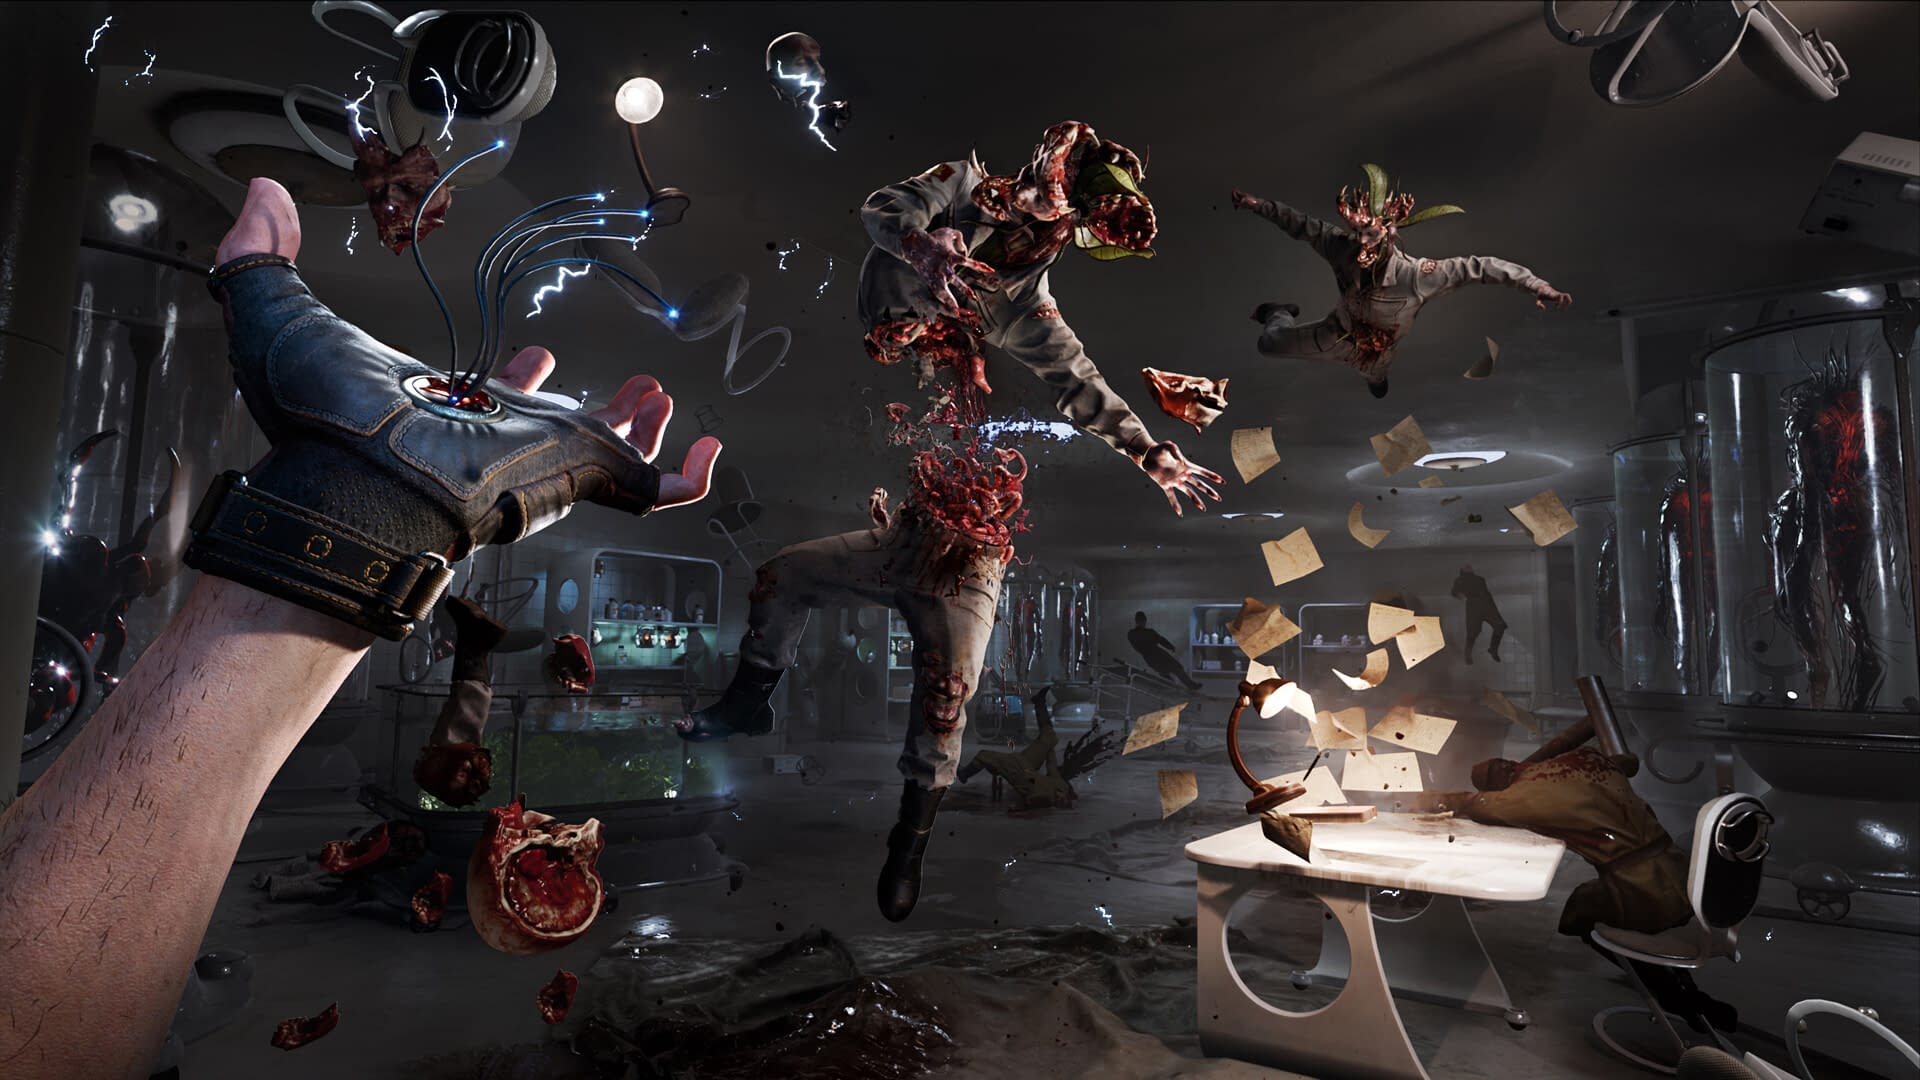 The release date of the expected game Atomic Heart has been announced